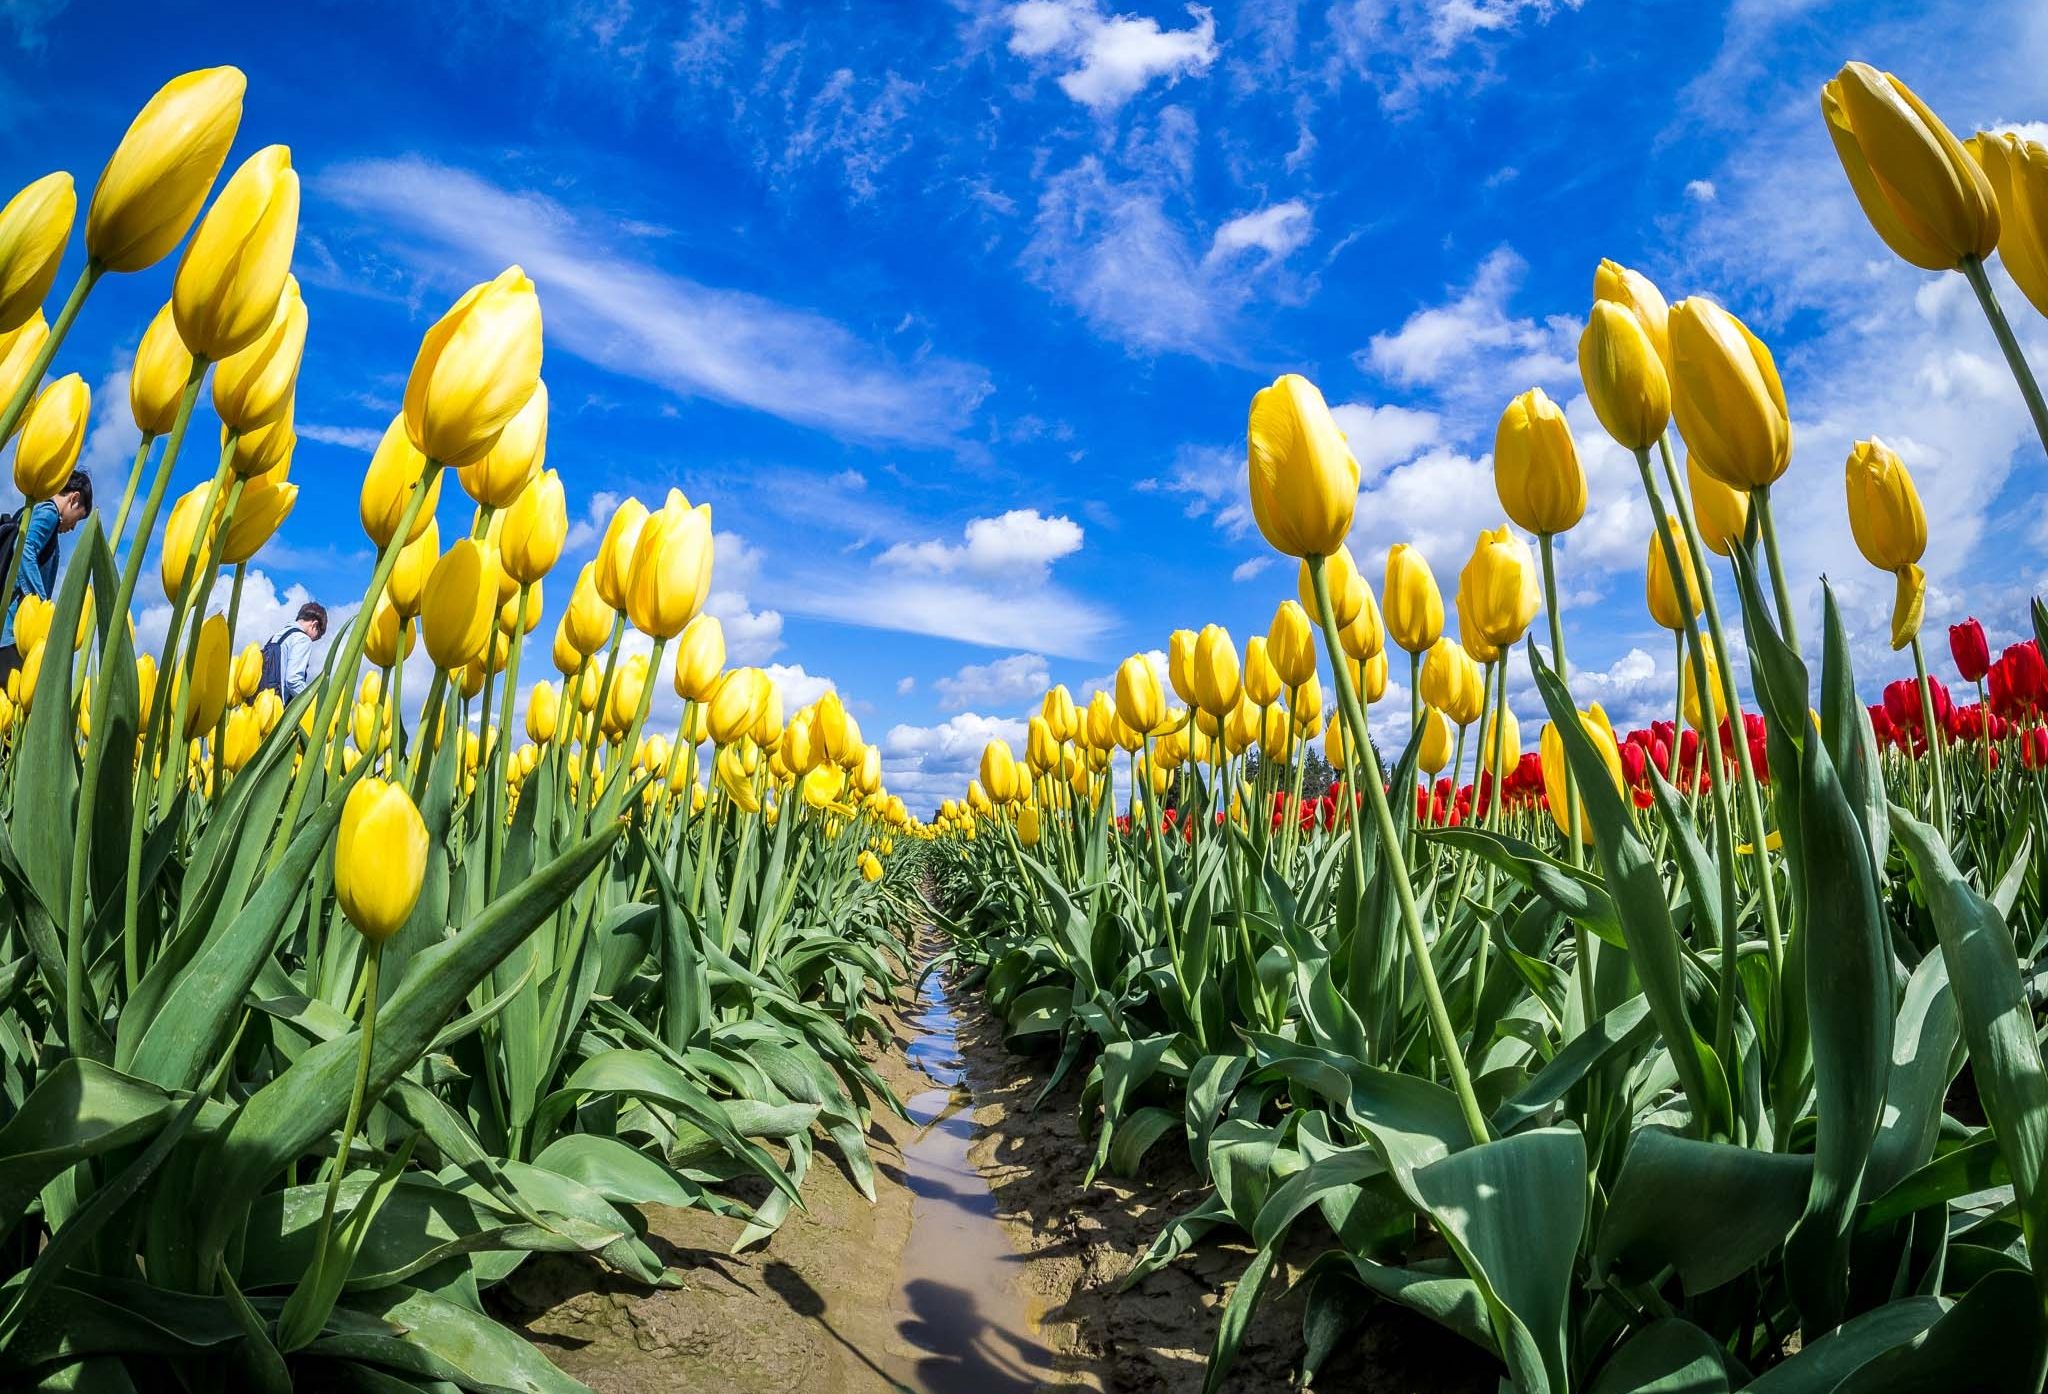 blue, field, spring, yellow, red, flowers, Washington, tulips, green, agriculture, beautiful wallpaper